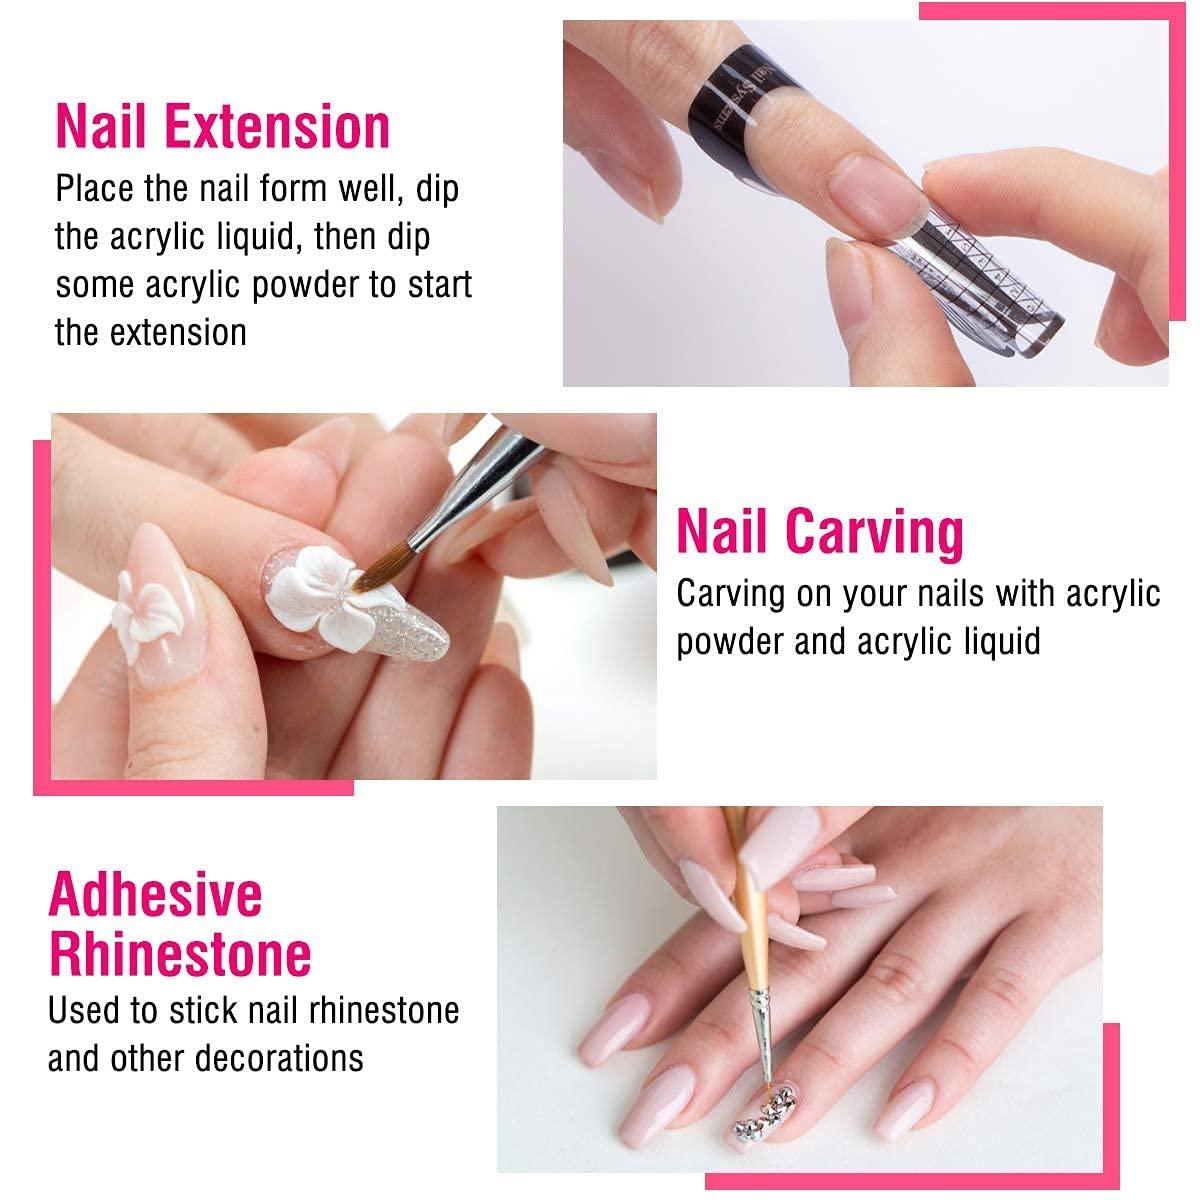 Can You Paint Acrylic Nails with Normal Nail Polish? – ORLY